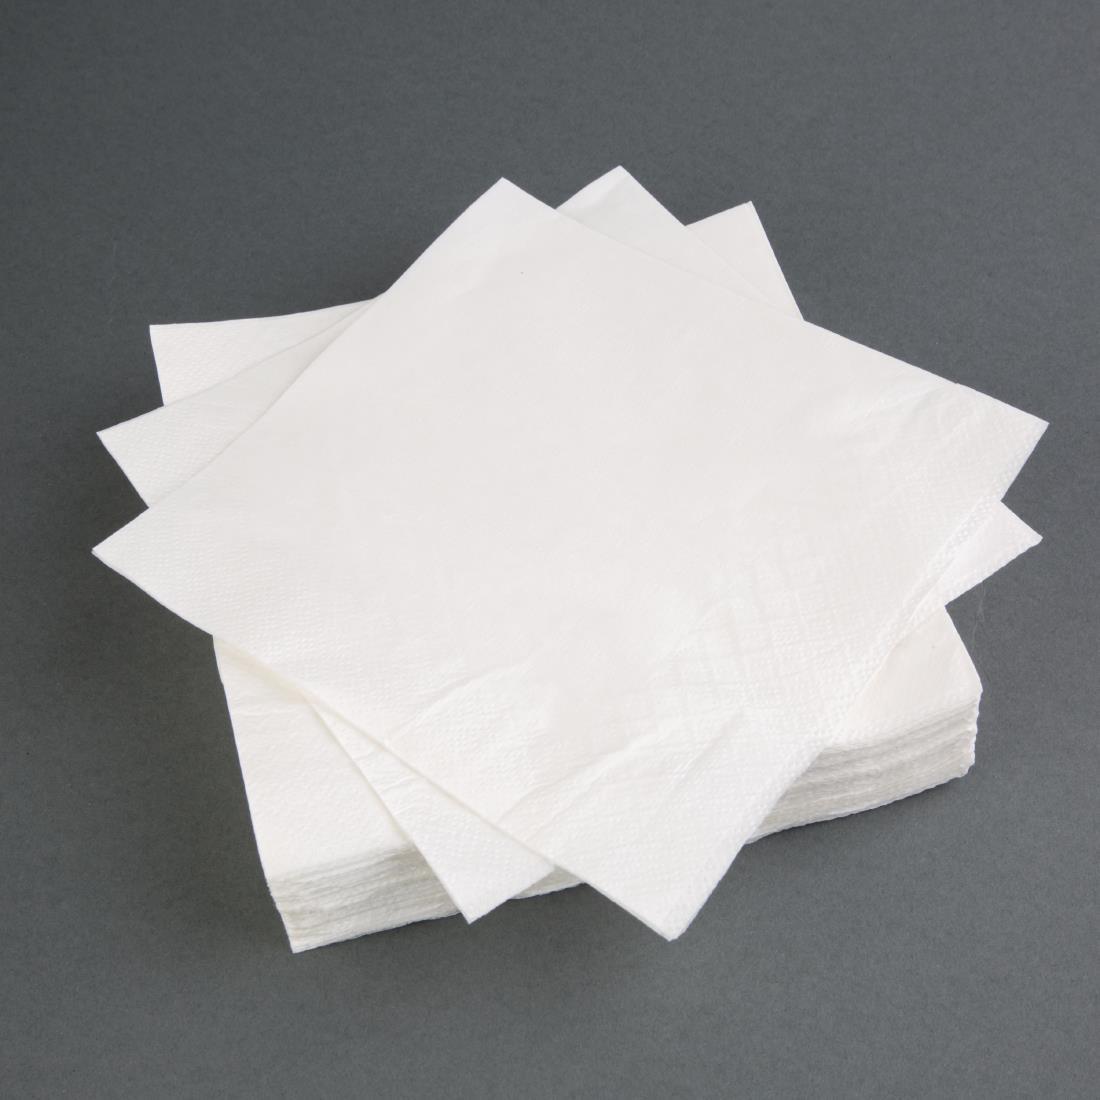 Fiesta Recyclable Lunch Napkin White 30x30cm 2ply 1/4 Fold (Pack of 2000) - CM562  - 4